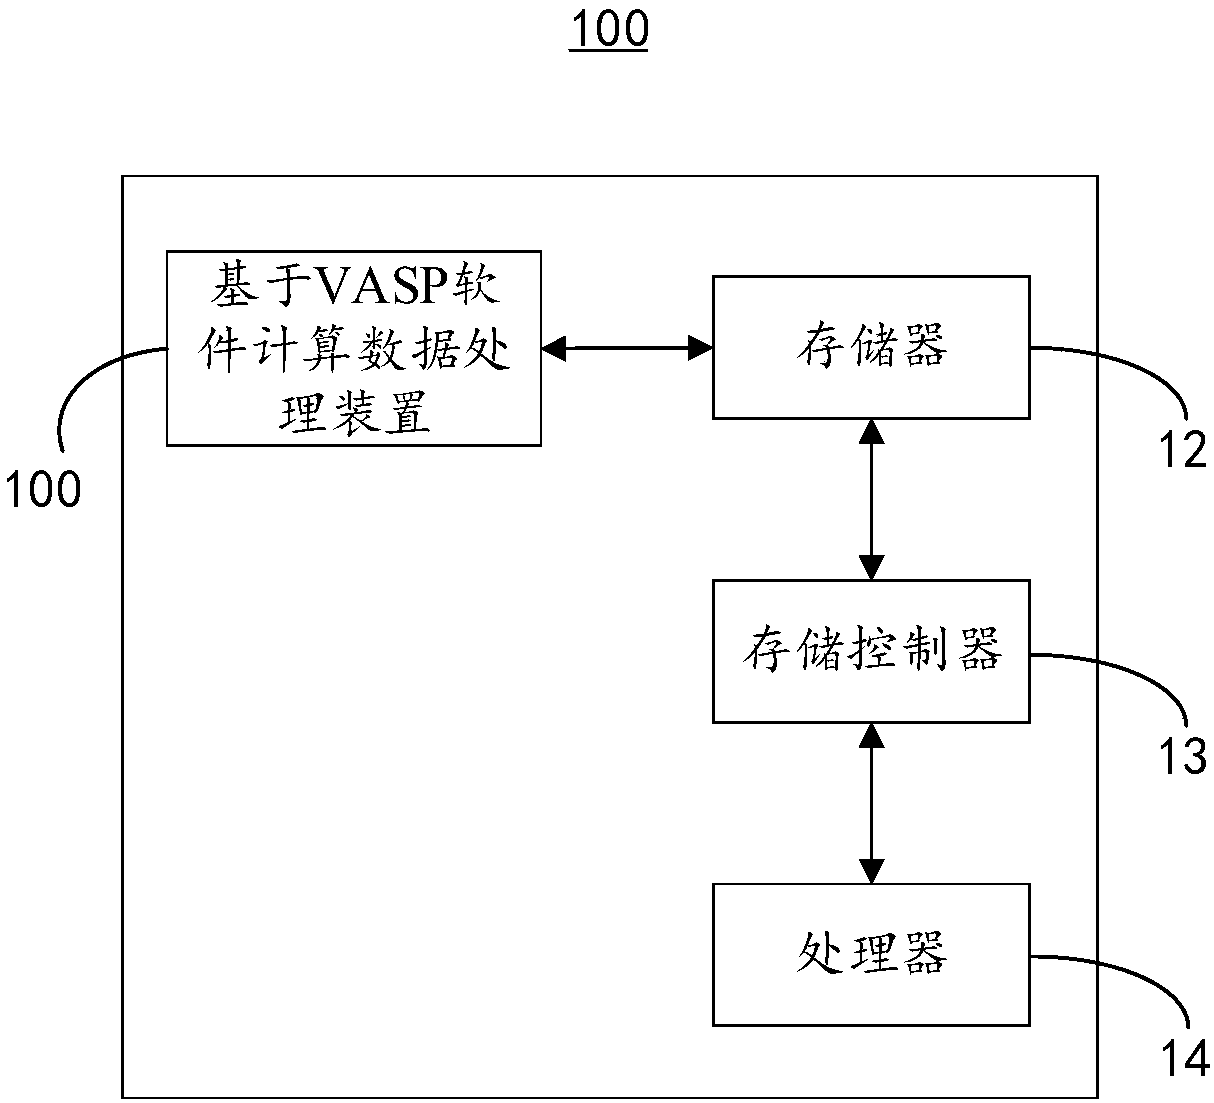 A method and apparatus for compute data processing base on VASP software